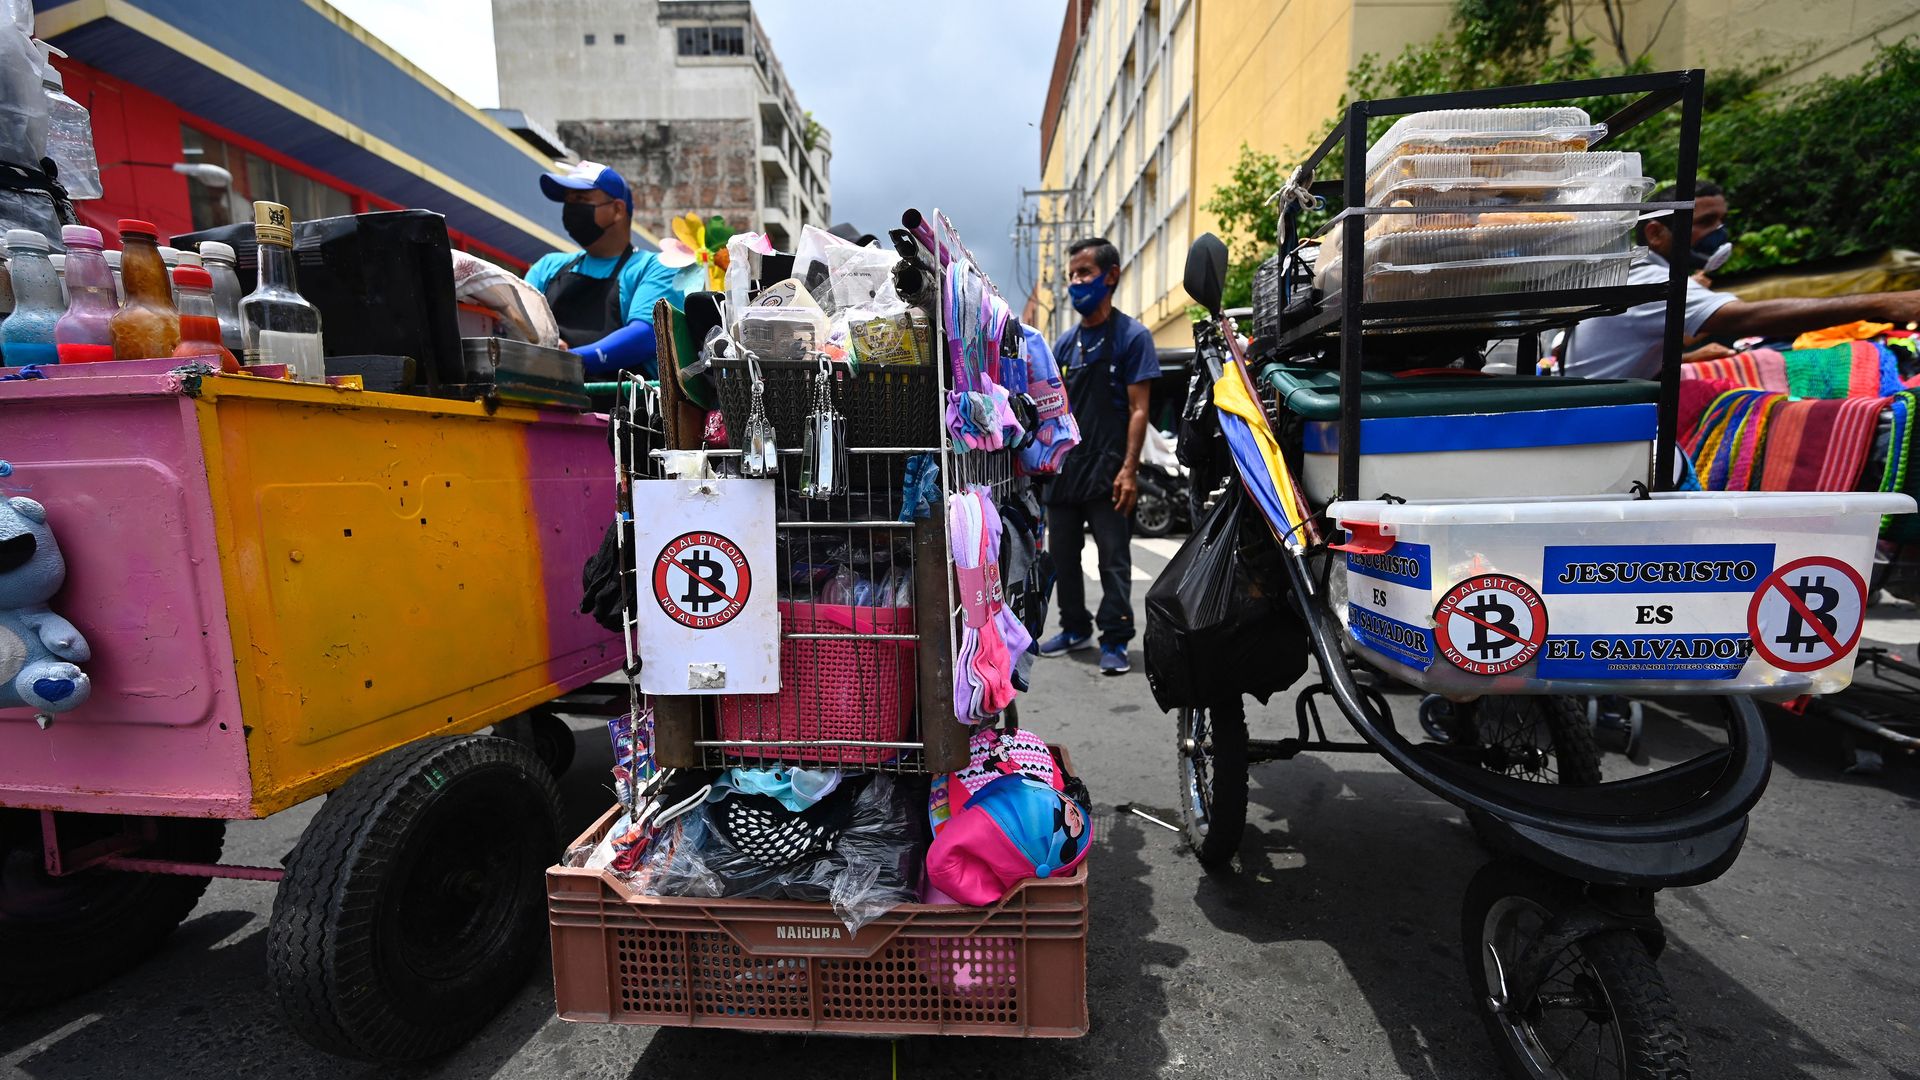 Street vendors in San Salvador have put stickers in their carts that say “No to Bitcoin”. 